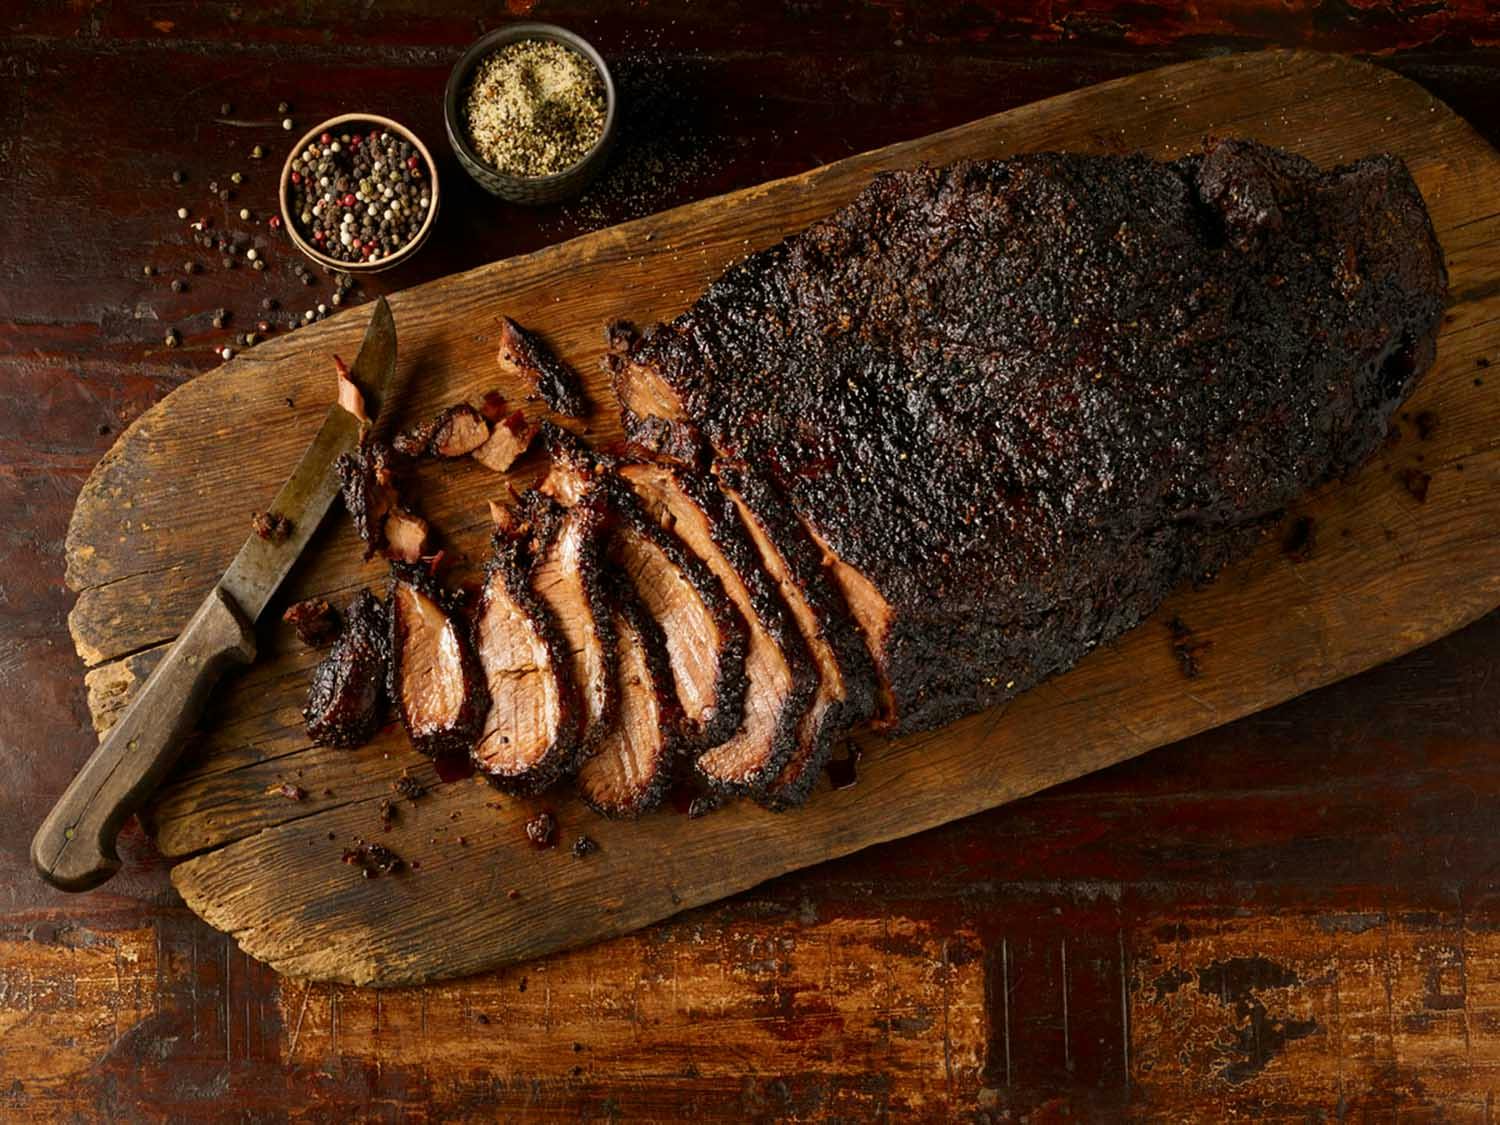 Will this be the best new barbecue restaurant in town?